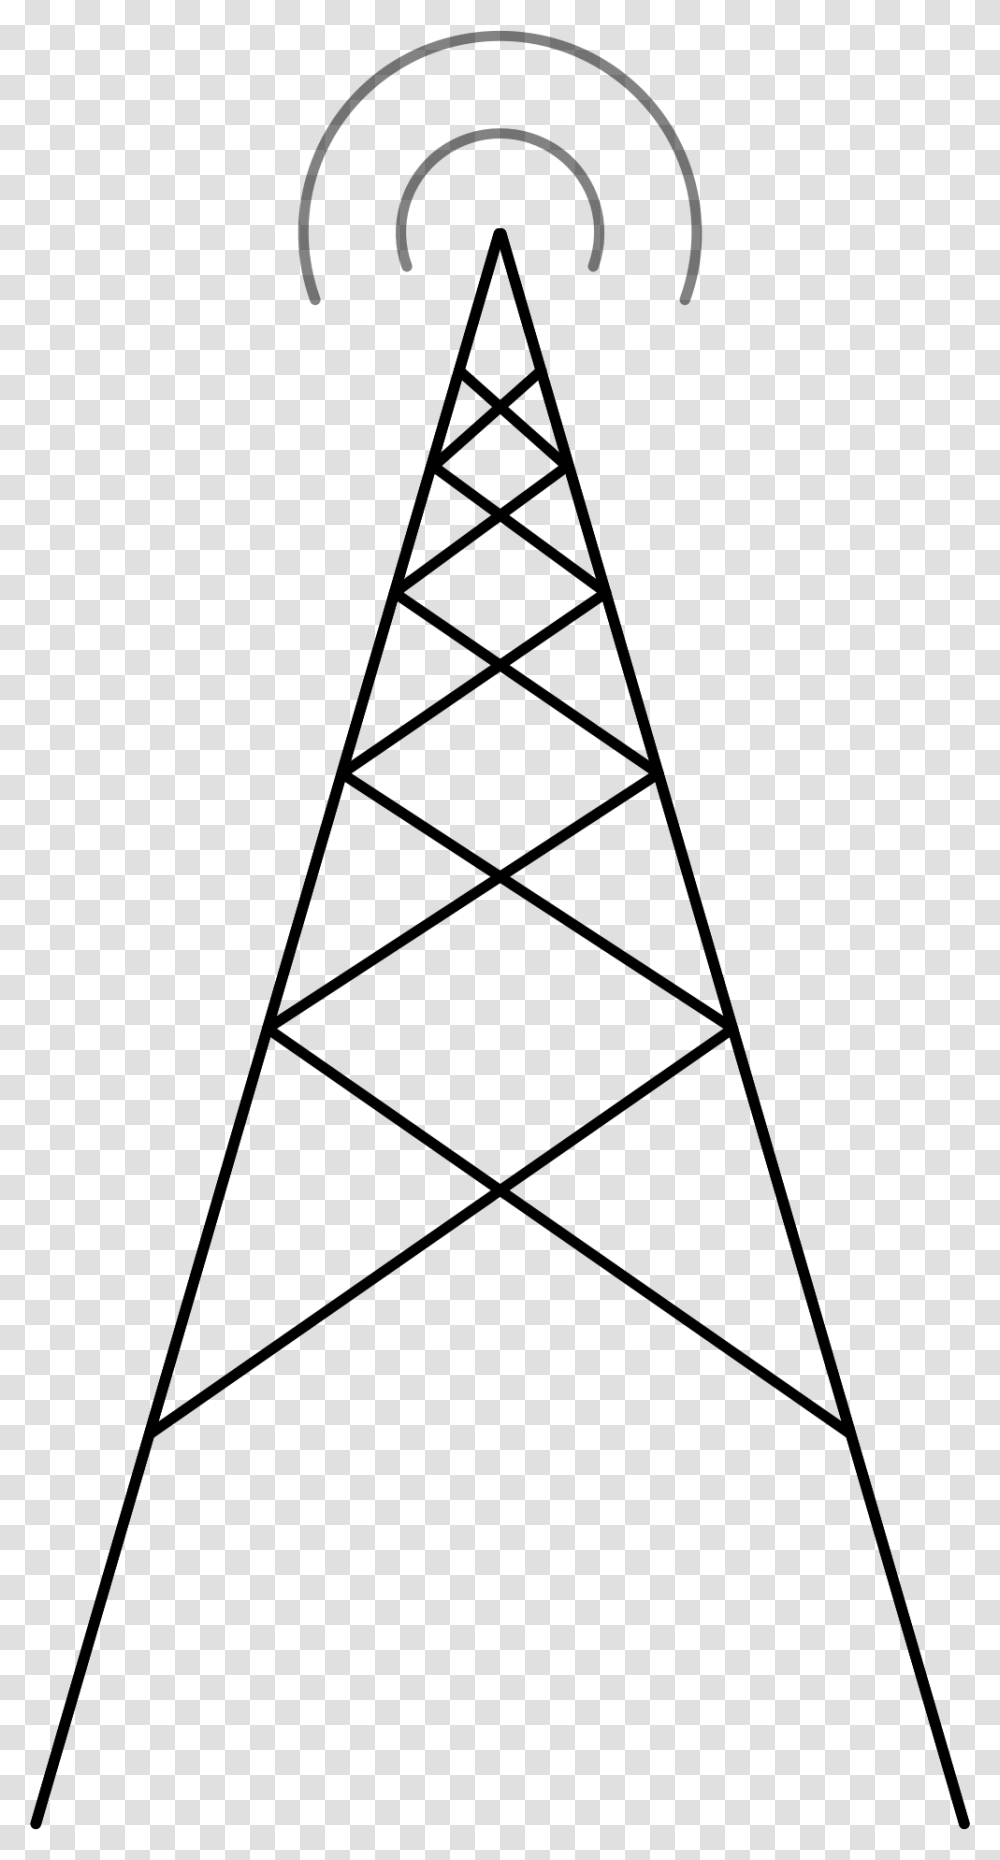 Antenna Image For Designing Projects Antenna, Gray, World Of Warcraft Transparent Png